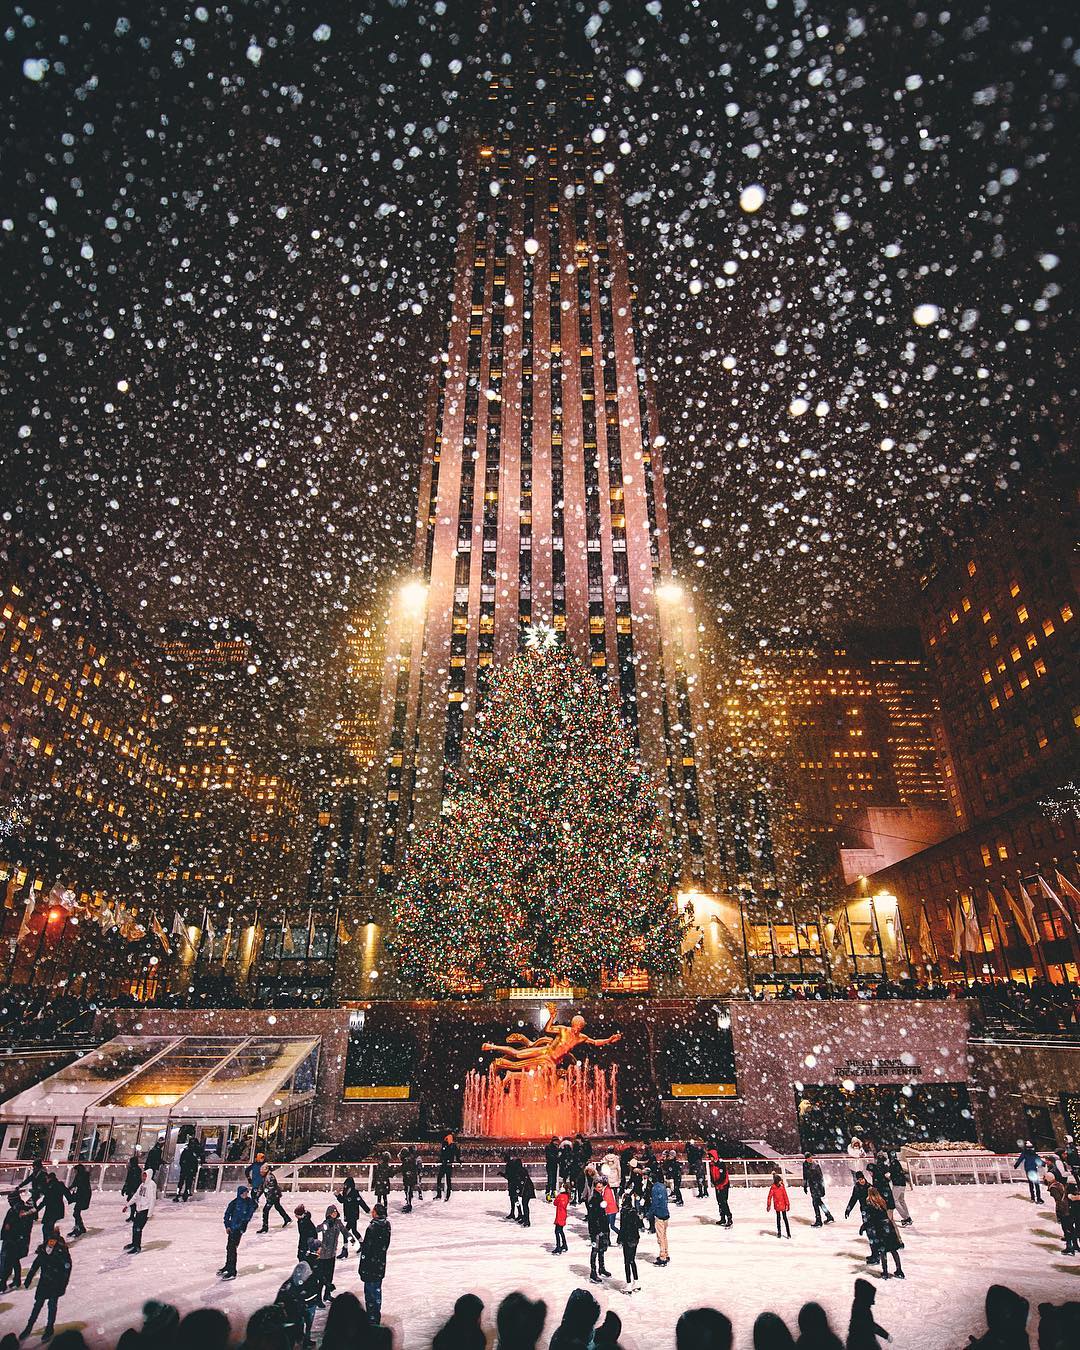 30 Rock in the winter with people ice skating under a the large Christmas tree on a calm night in New York City. Photo by instagram user @thewilliamanderson